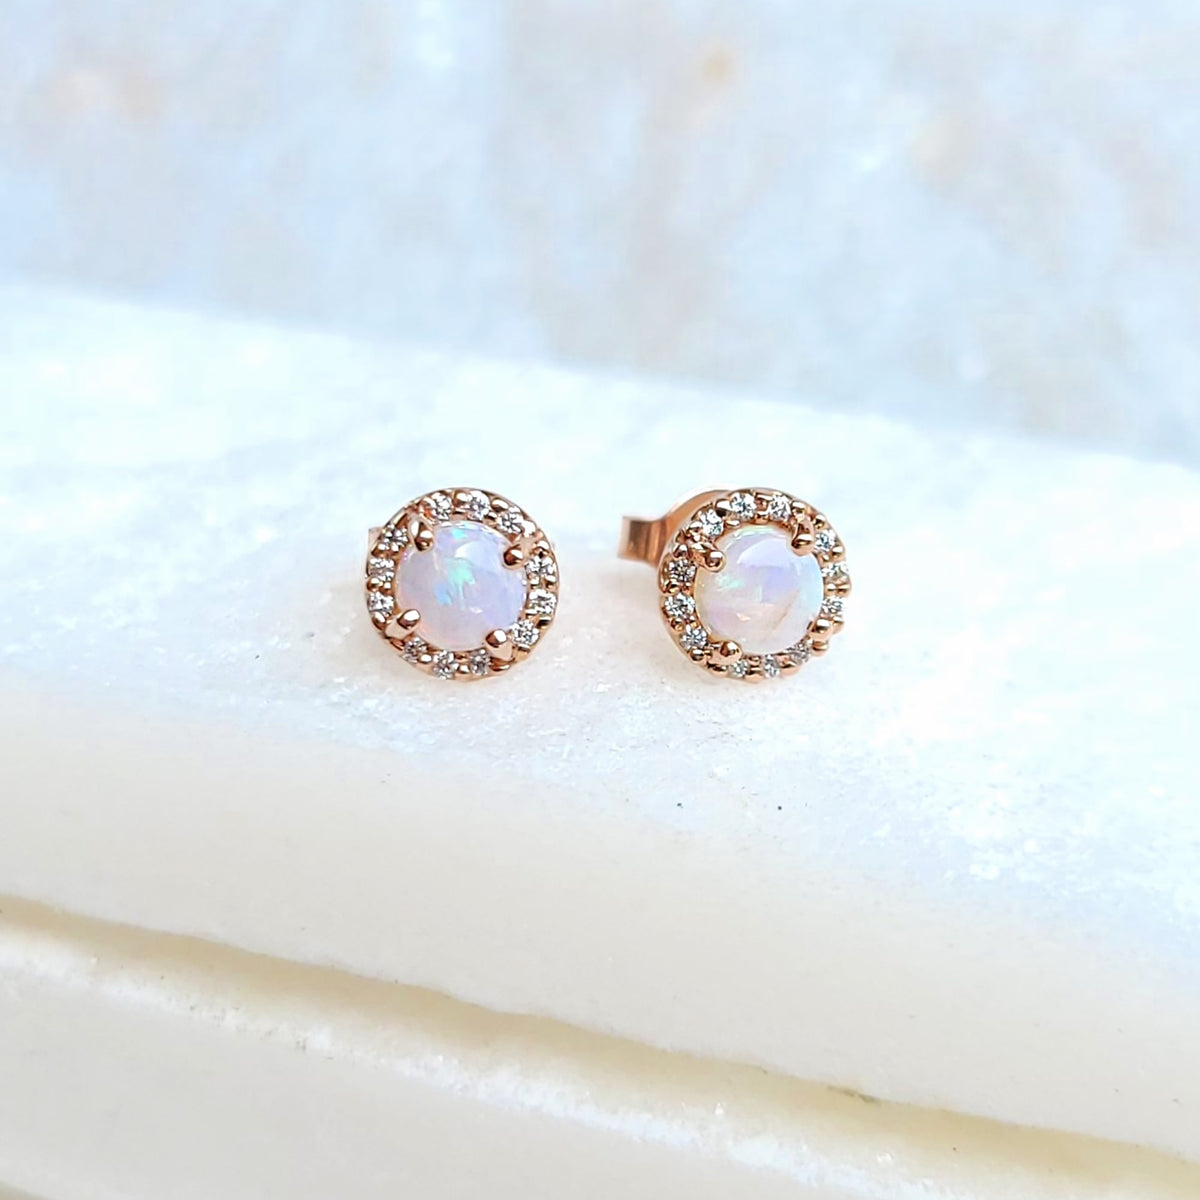 Sincerely Ginger Jewelry 14K White Opal Diamond Earrings in Rose Gold